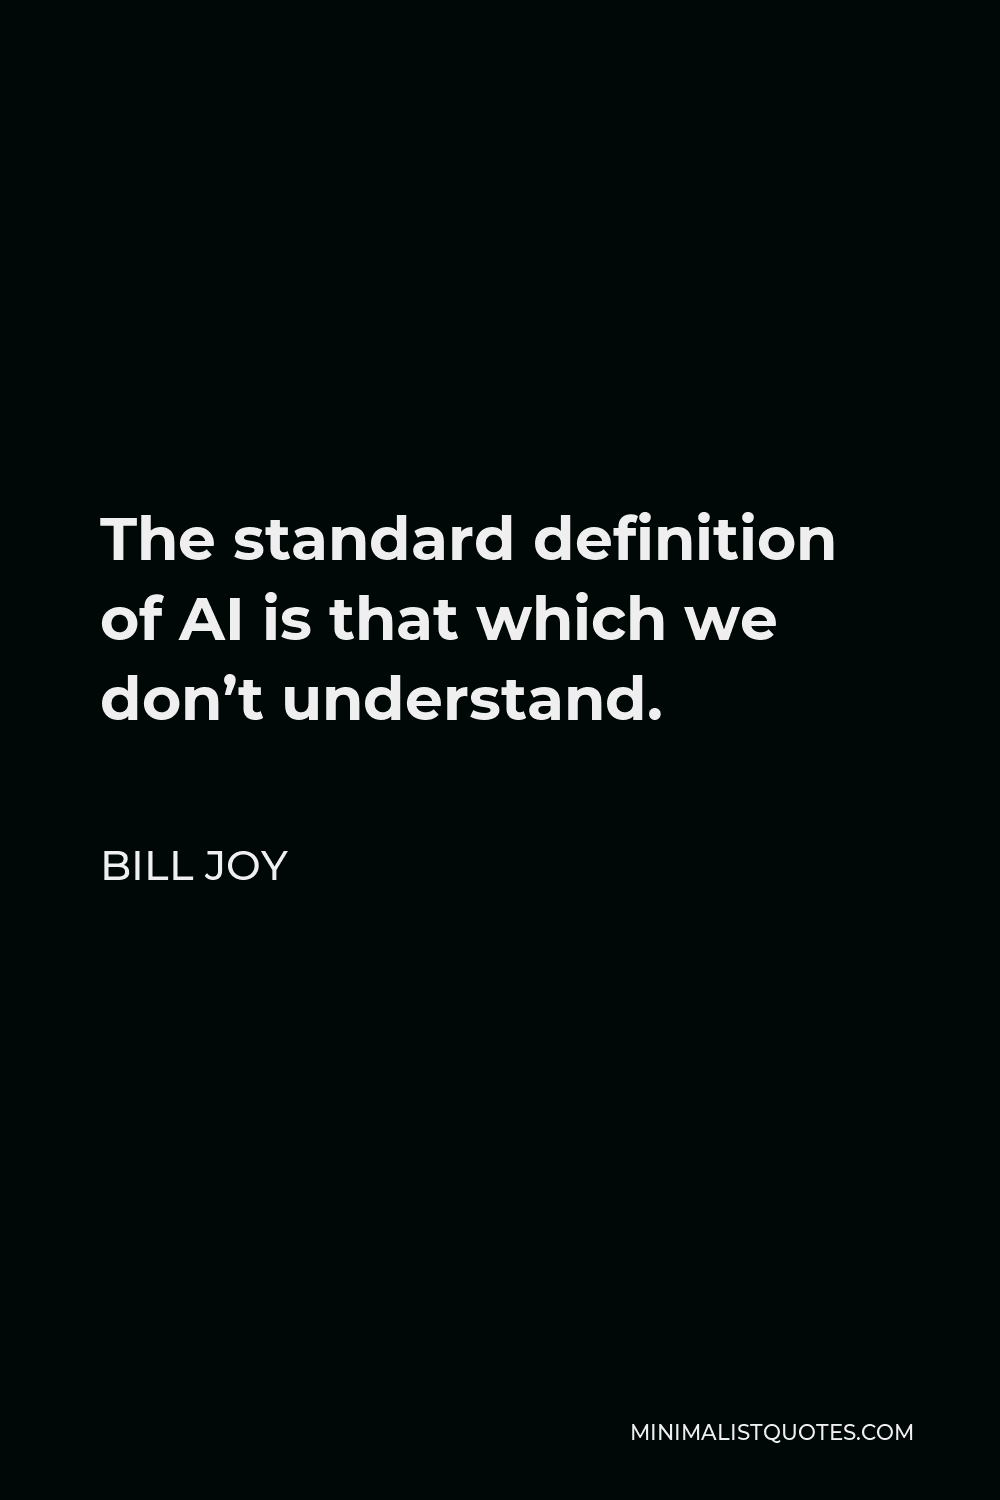 Bill Joy Quote - The standard definition of AI is that which we don’t understand.